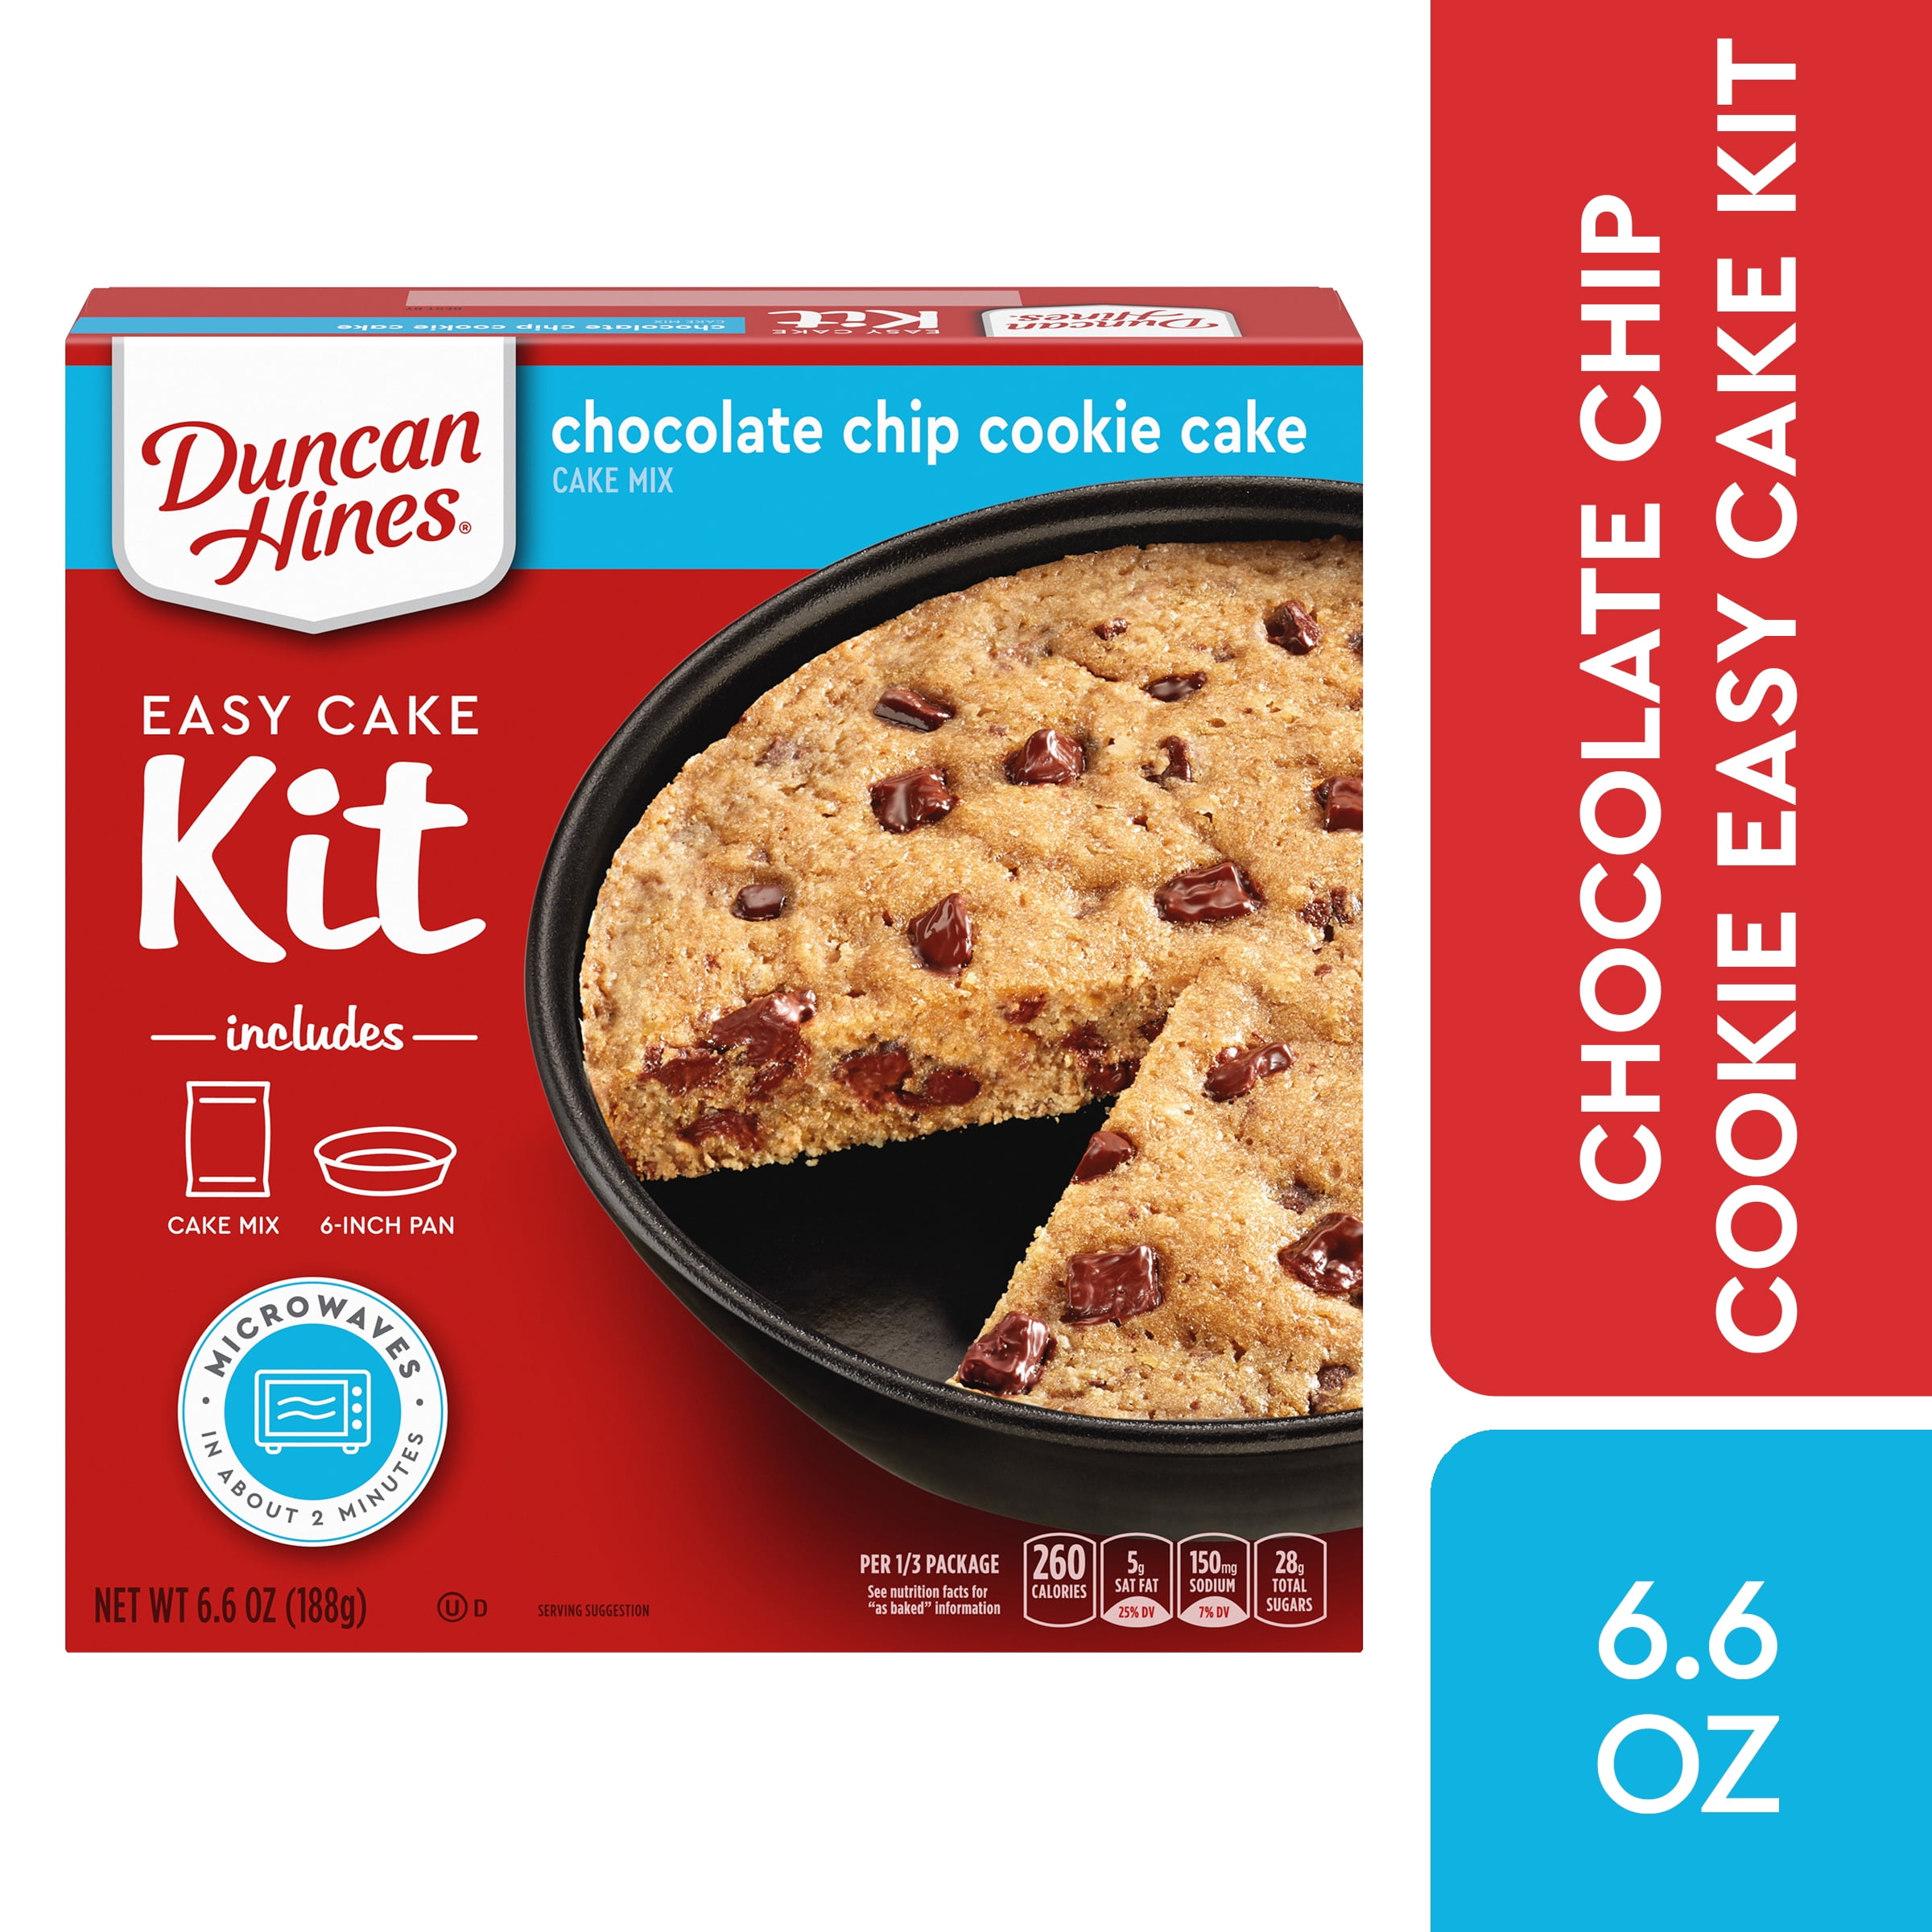 duncan hines white cake mix chocolate chip cookies